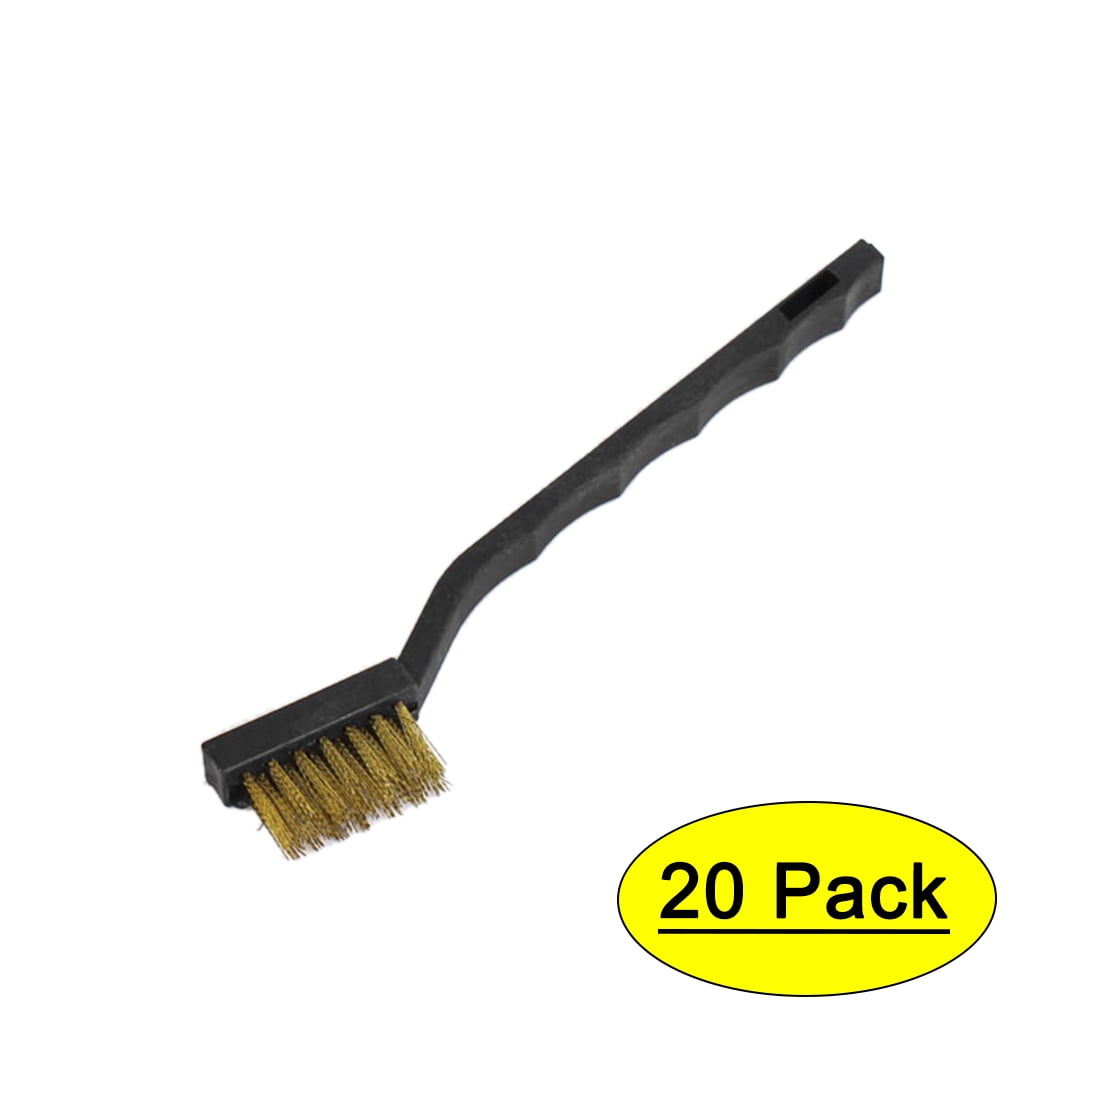 Pack of 6 46605 Hyde Tool Brass Wire Brushes Brass 